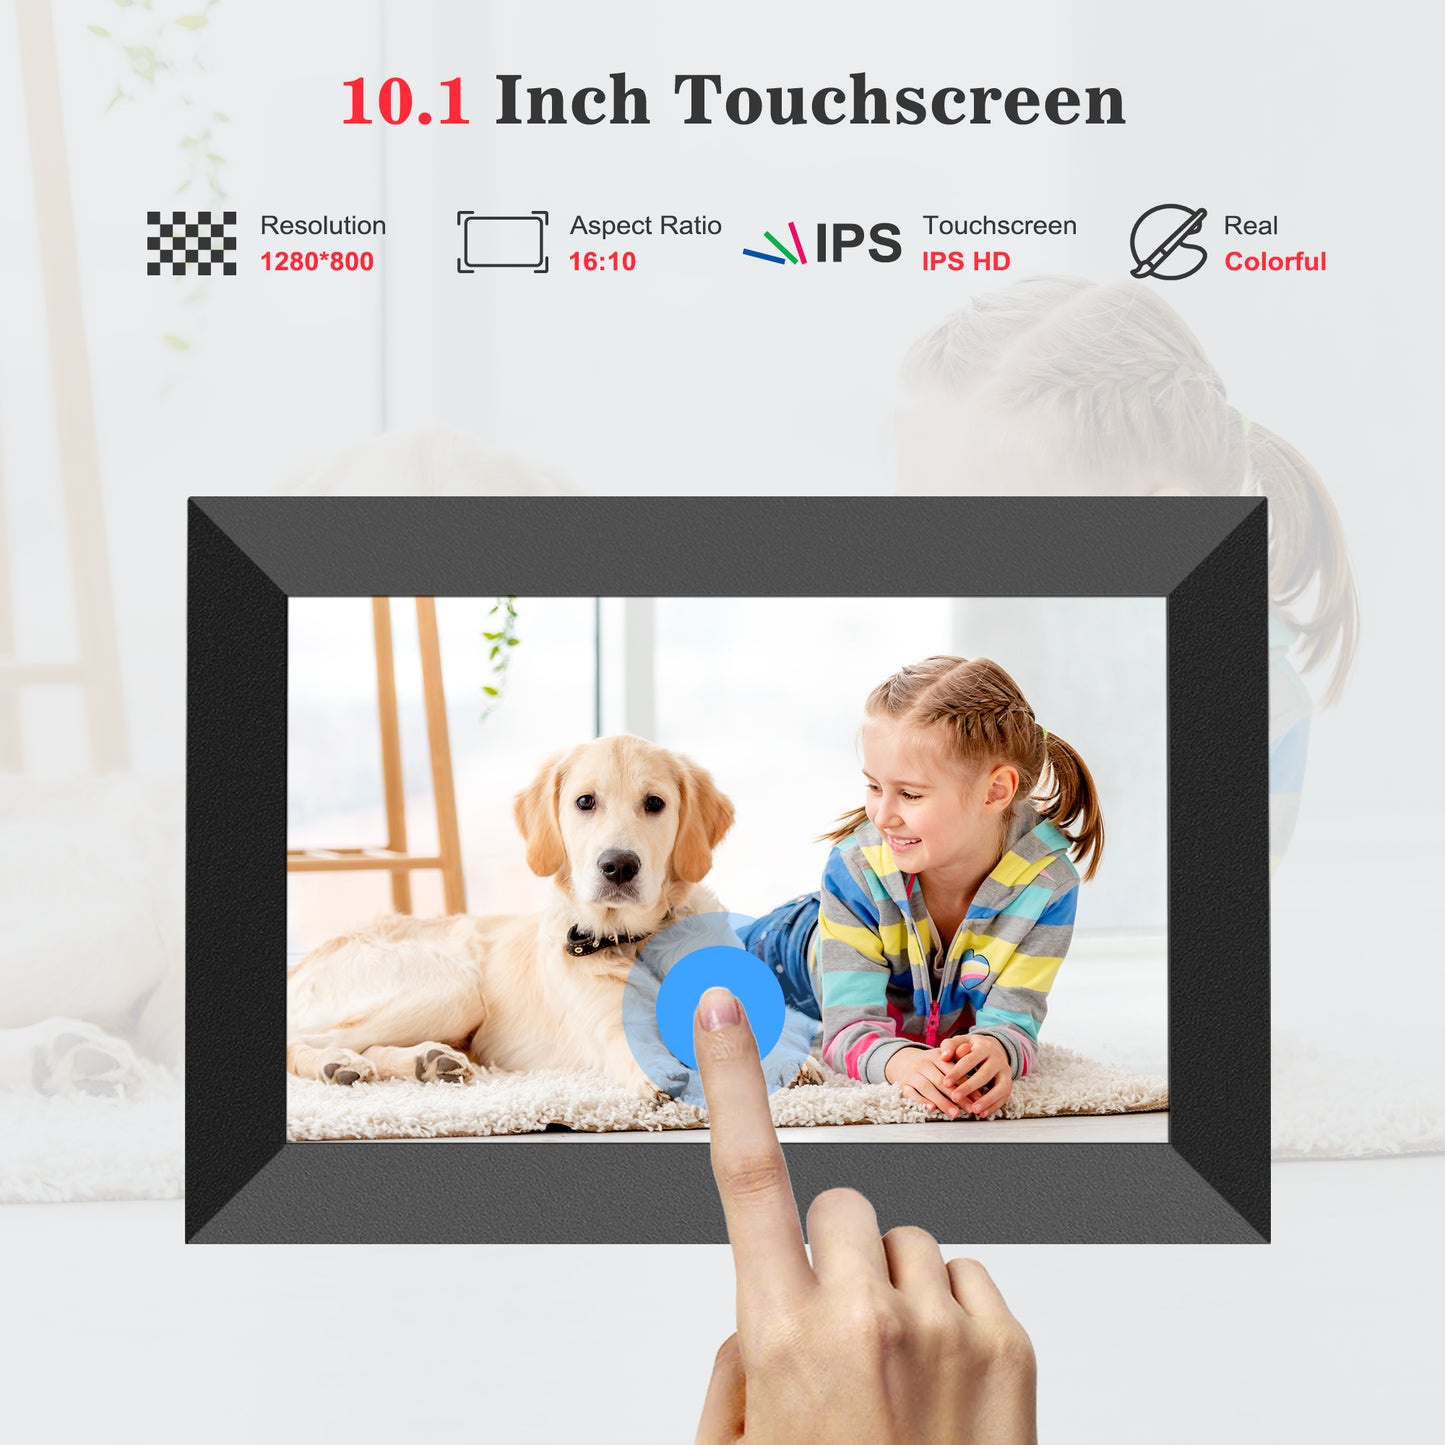 Frameo WiFi Digital Picture Frame,10.1" electronic photo frame with IPS Touch Screen,16GB Storage Smart Cloud Photo Frame, Auto-Rotate,Send Photos and Videos from via Frameo App,Best Gift Choice!